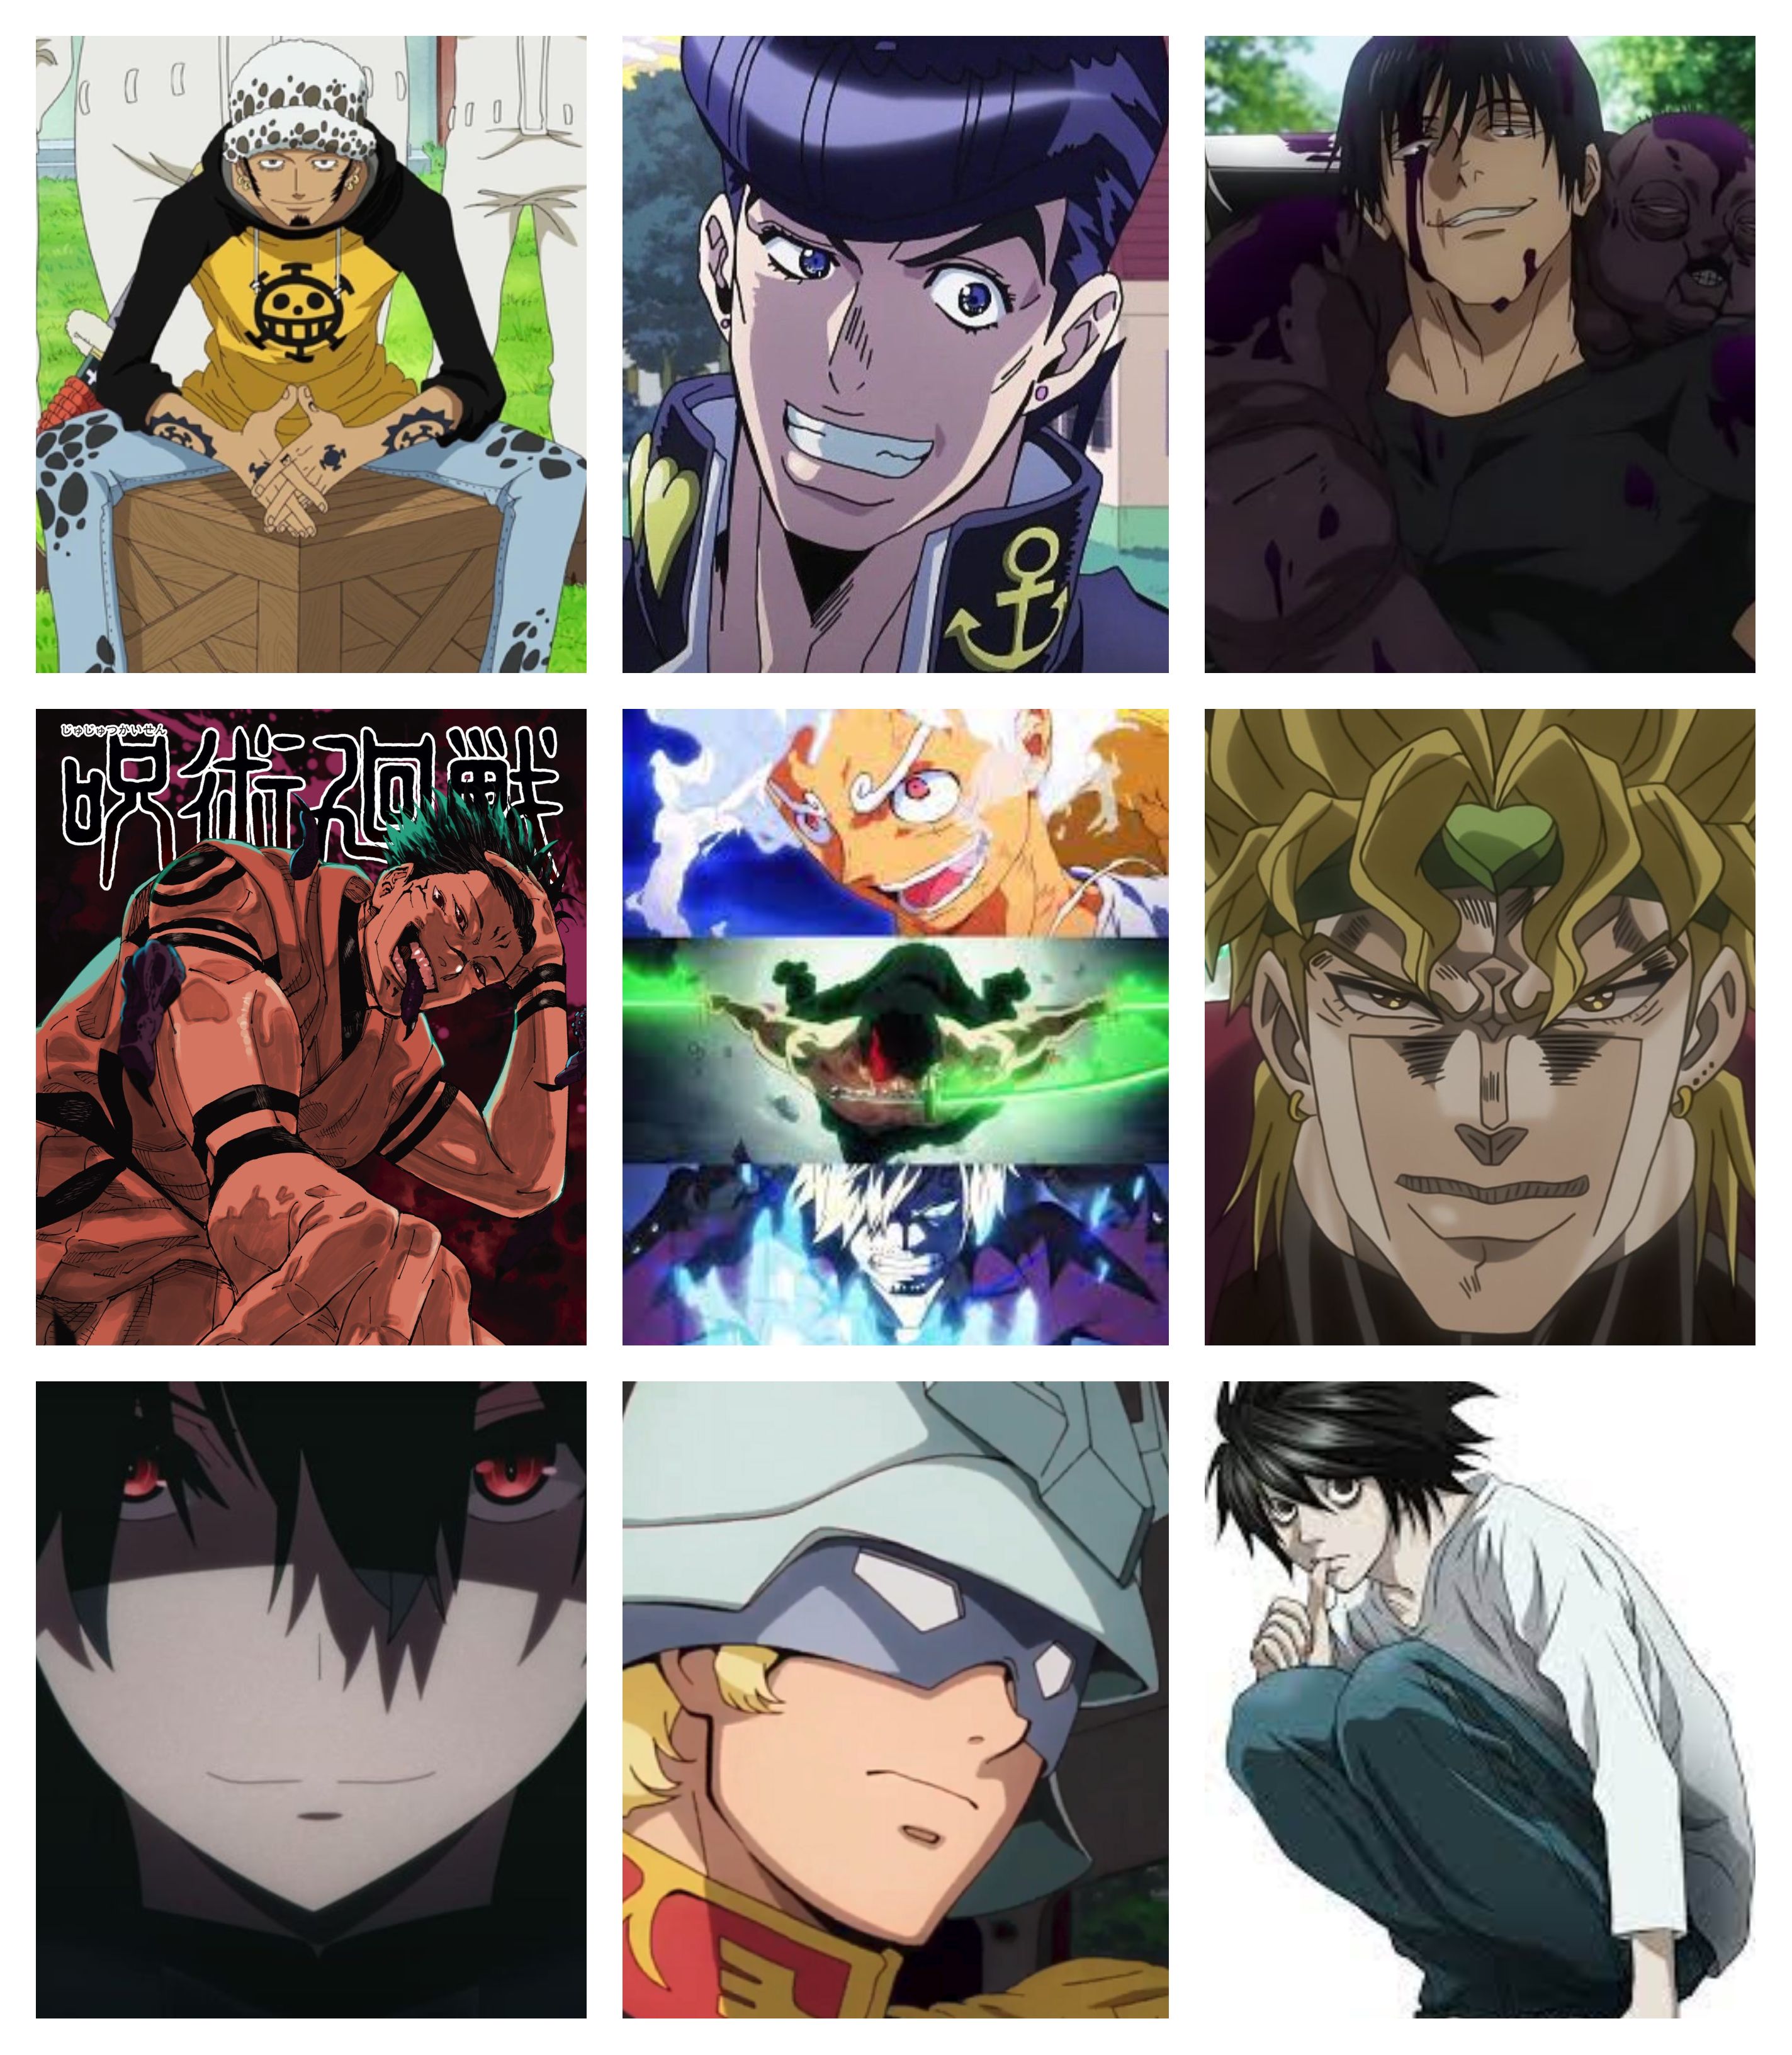 extended list of Favourite characters